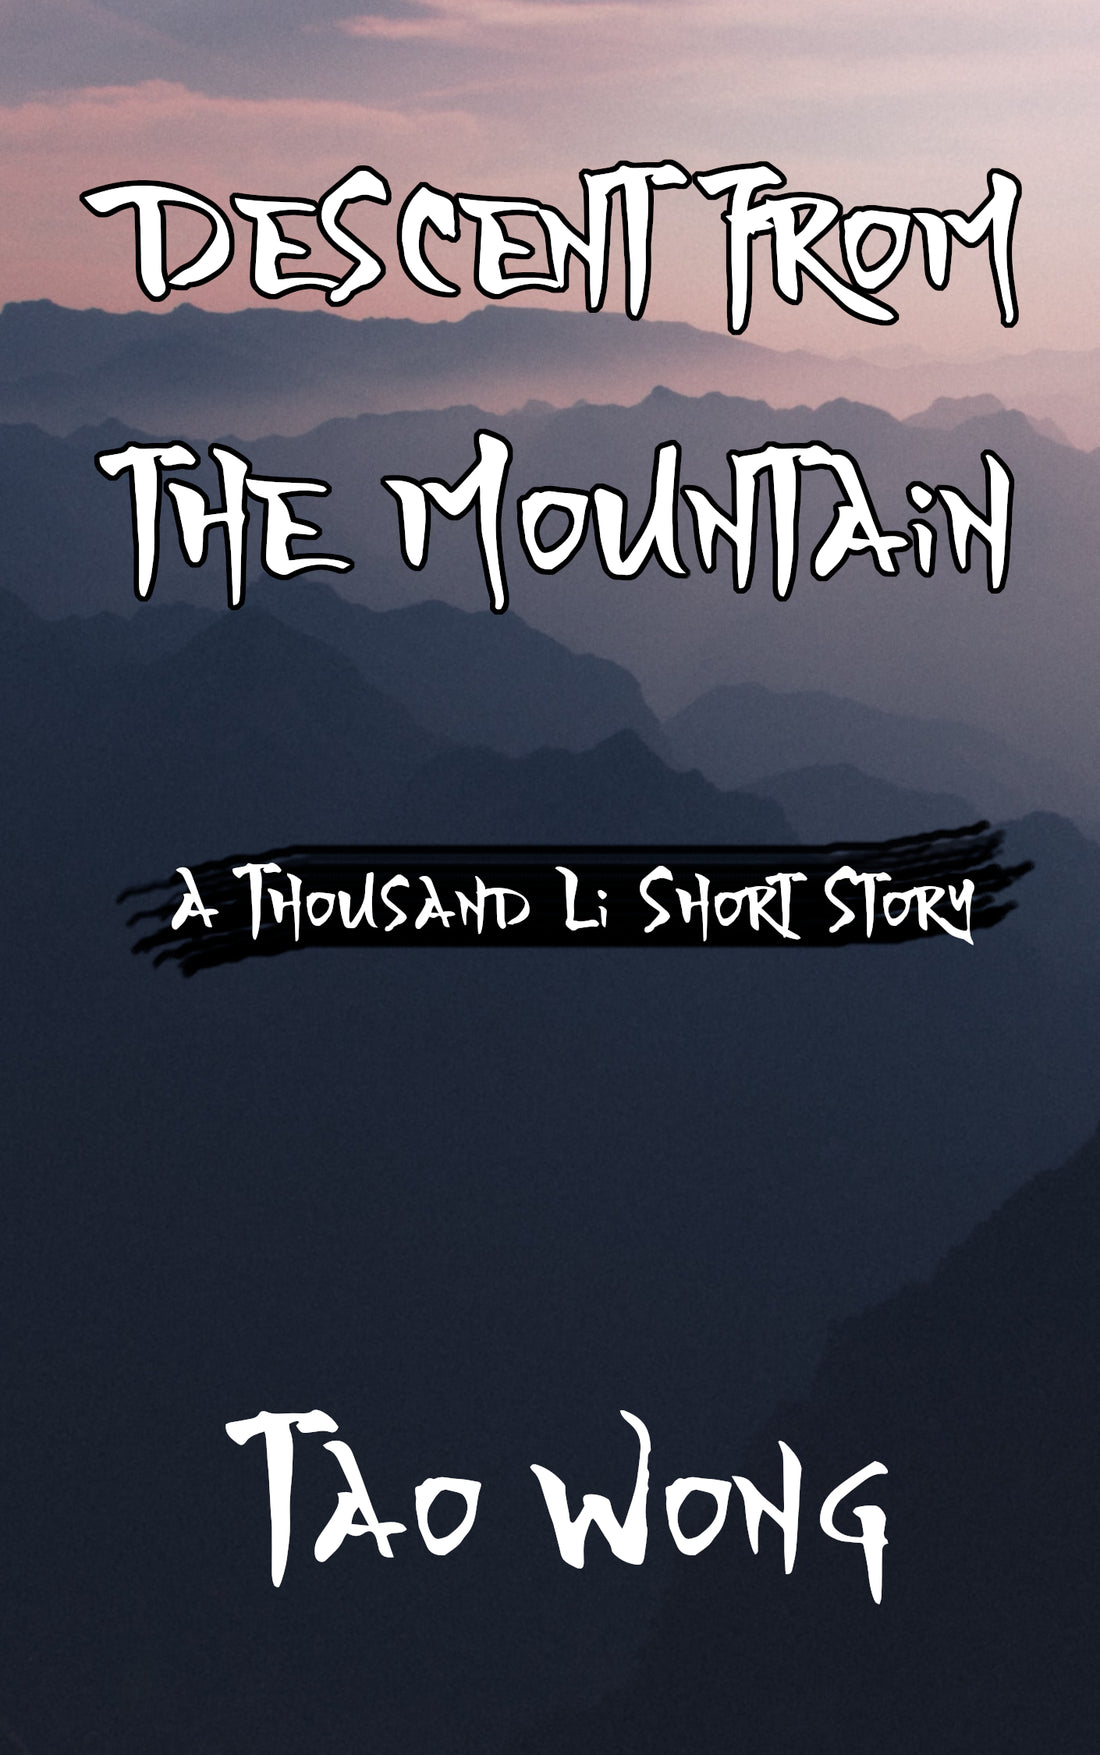 There’s a New A Thousand Li Short Story